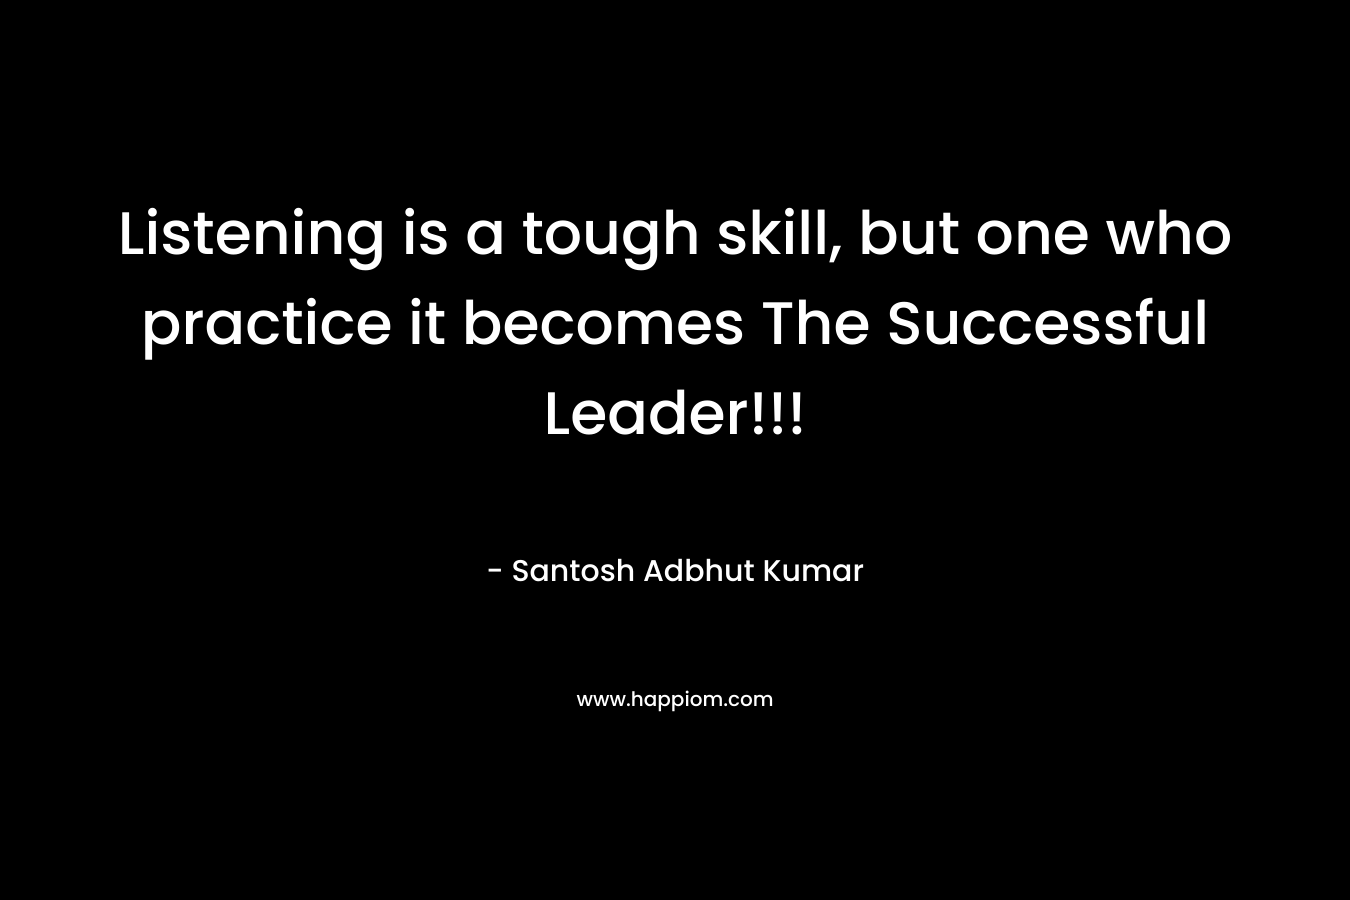 Listening is a tough skill, but one who practice it becomes The Successful Leader!!! – Santosh Adbhut Kumar